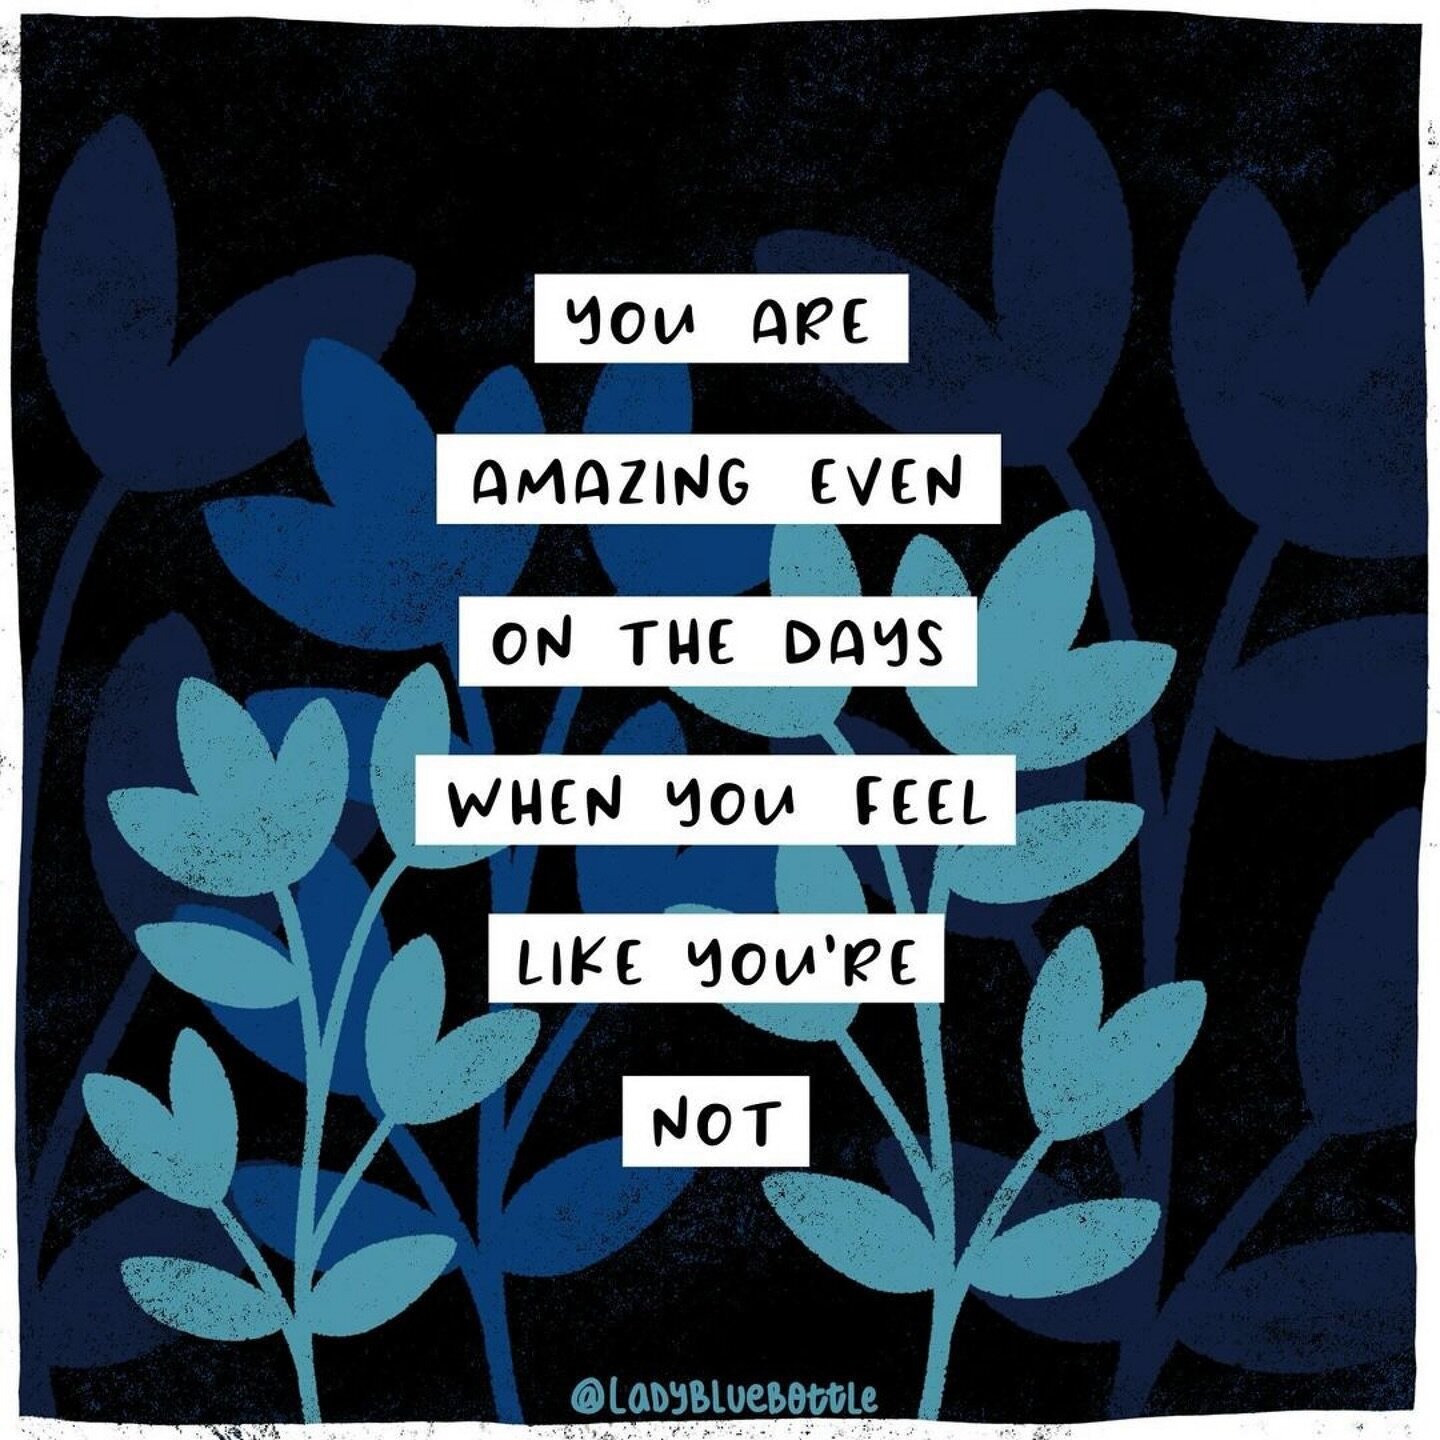 How are you feeling today?

If you&rsquo;re not feeling amazing, you&rsquo;re not alone. And you are amazing no matter what. 💙
・・・
#Repost @ladybluebottle
・・・
You are amazing even if you don&rsquo;t feel like it right now.💙

#lyme #community #exper